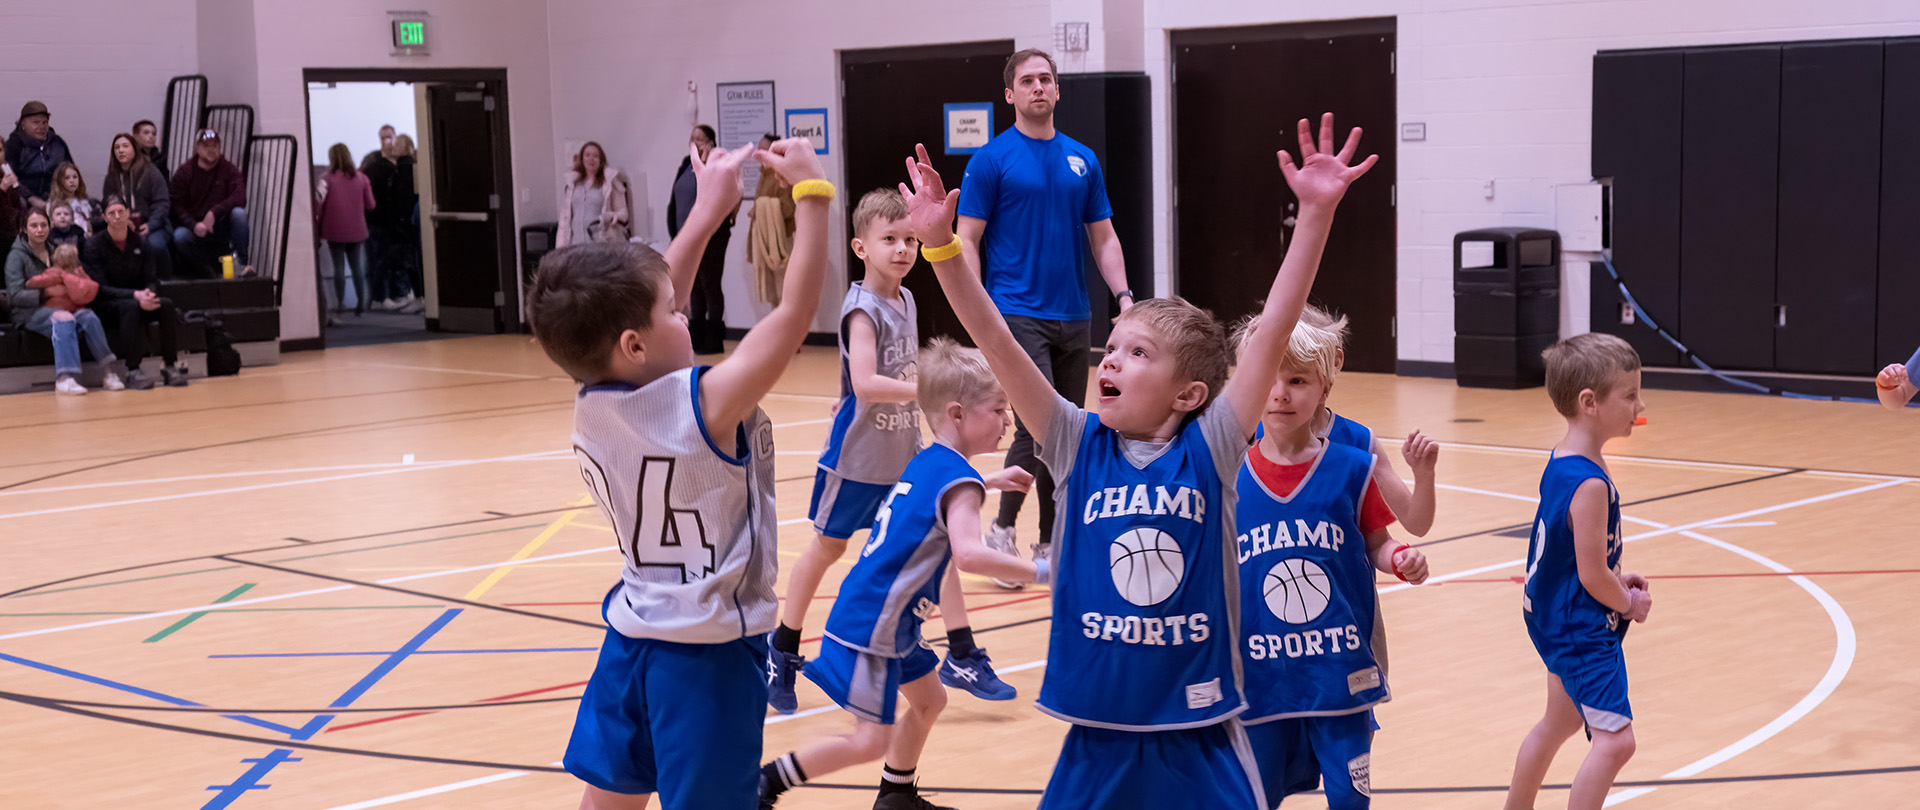 Youth Basketball
CHAMP leagues for ages 5–18
Winter Season: Nov 2023 – Feb 2024
 
